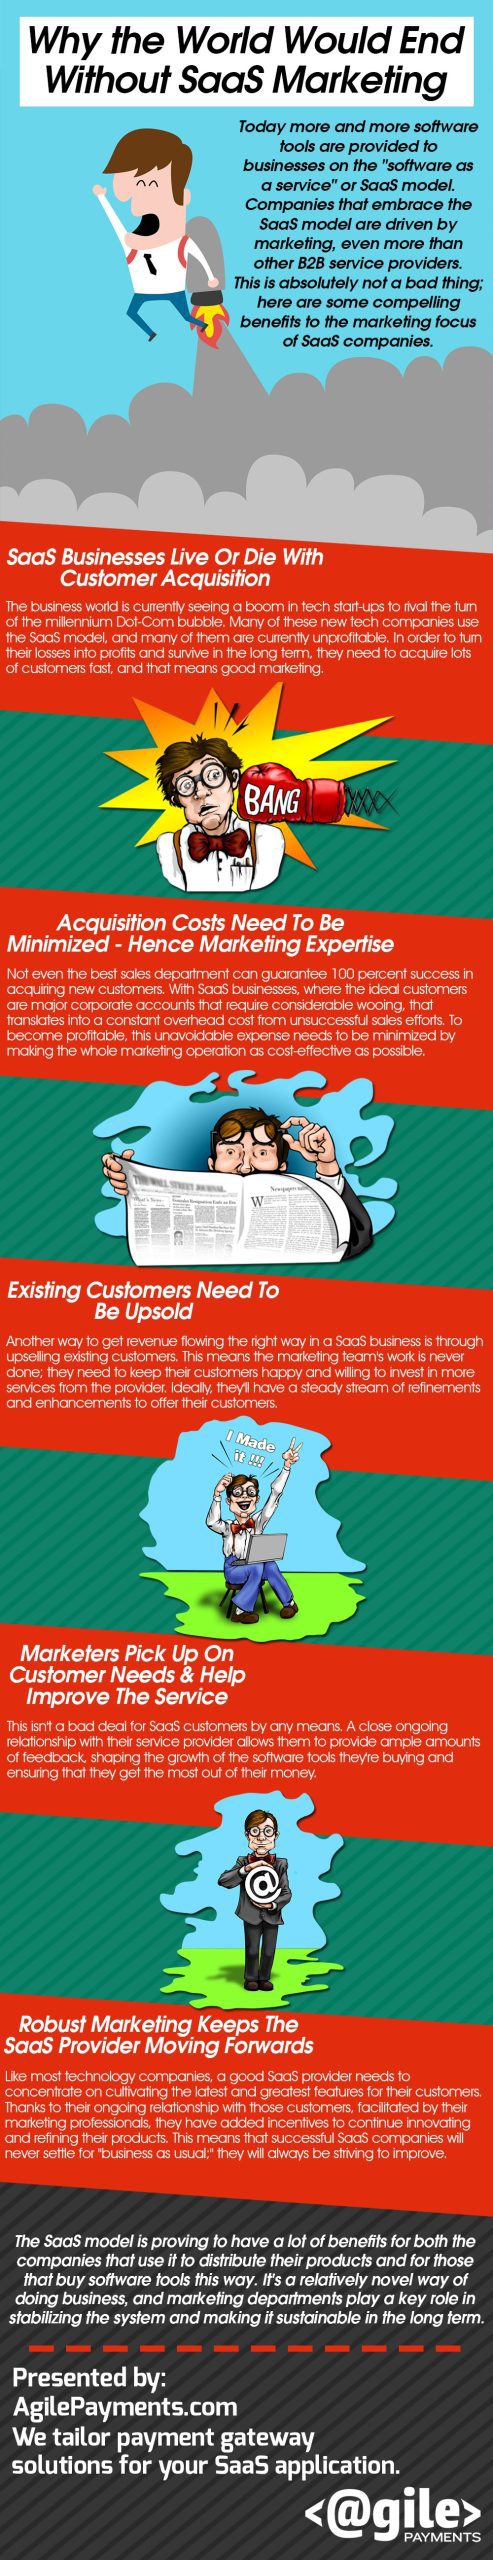 infographic-101-Why-the-World-Would-End-Without-SaaS-Marketing